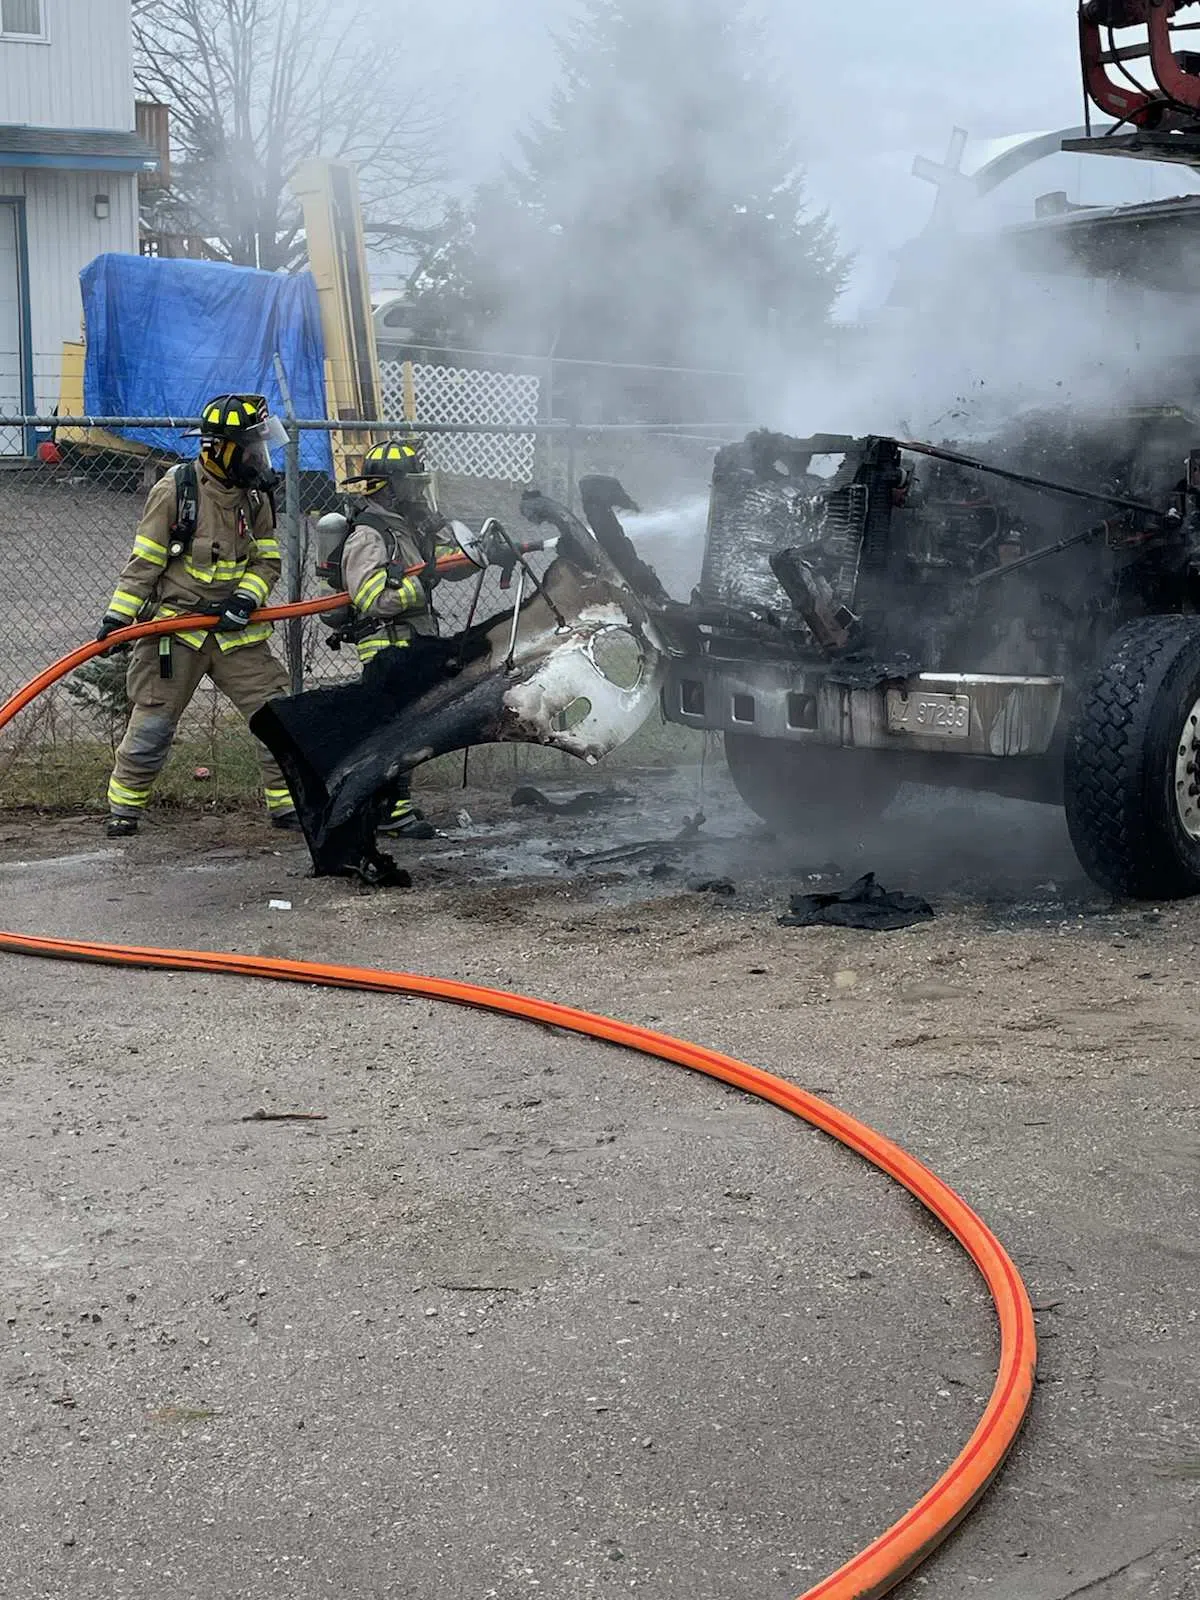 No Injuries Following Commercial Vehicle Fire in Gravenhurst